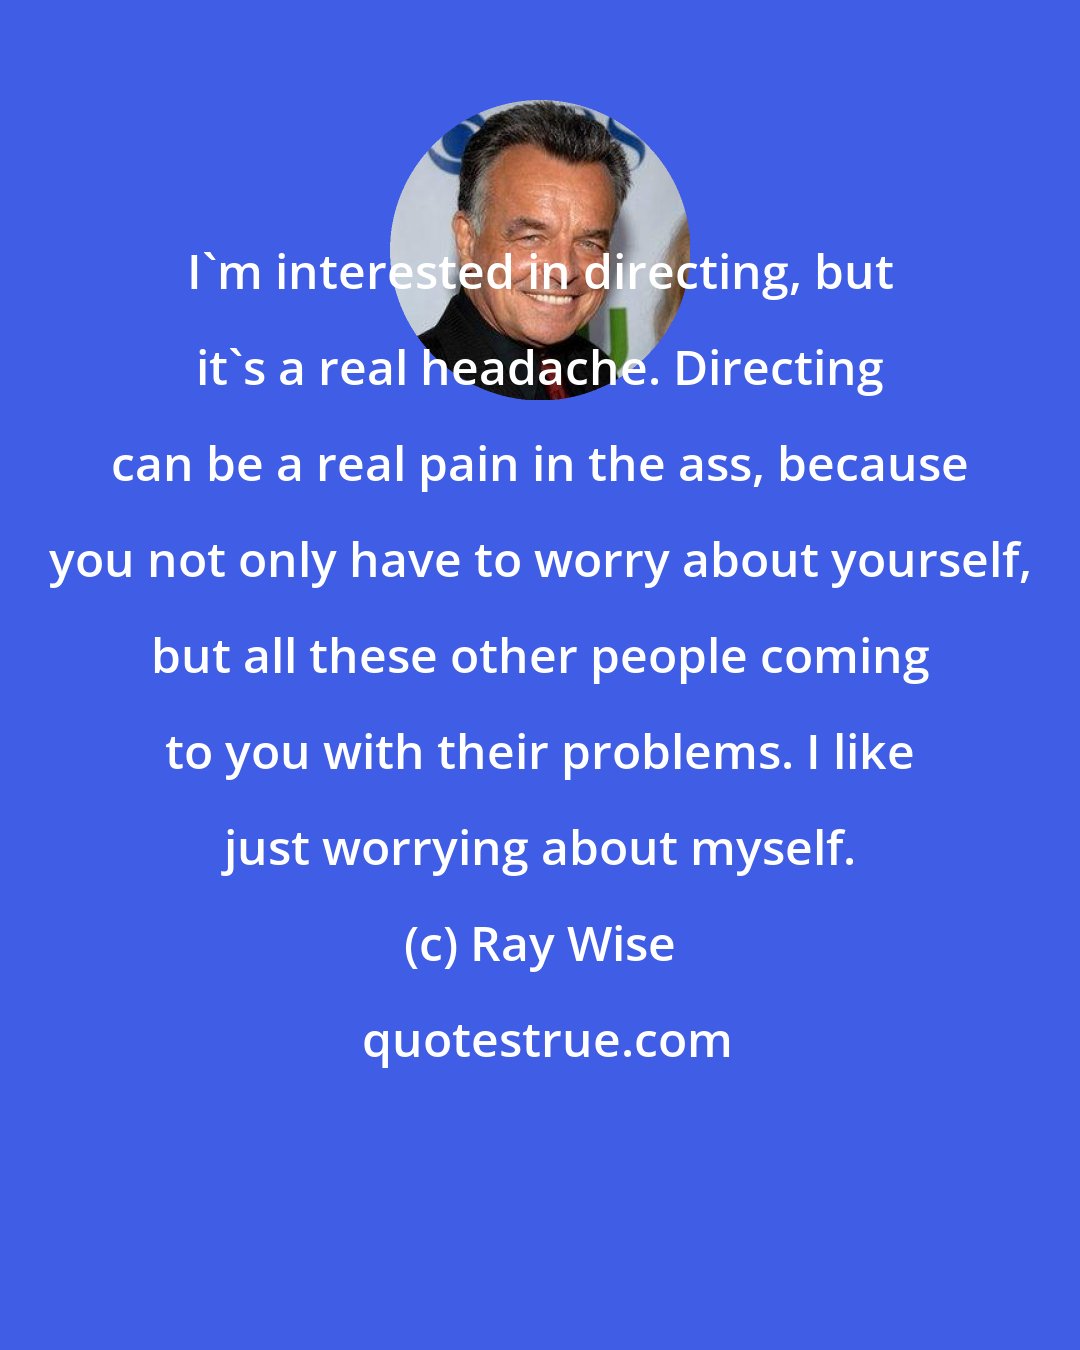 Ray Wise: I'm interested in directing, but it's a real headache. Directing can be a real pain in the ass, because you not only have to worry about yourself, but all these other people coming to you with their problems. I like just worrying about myself.